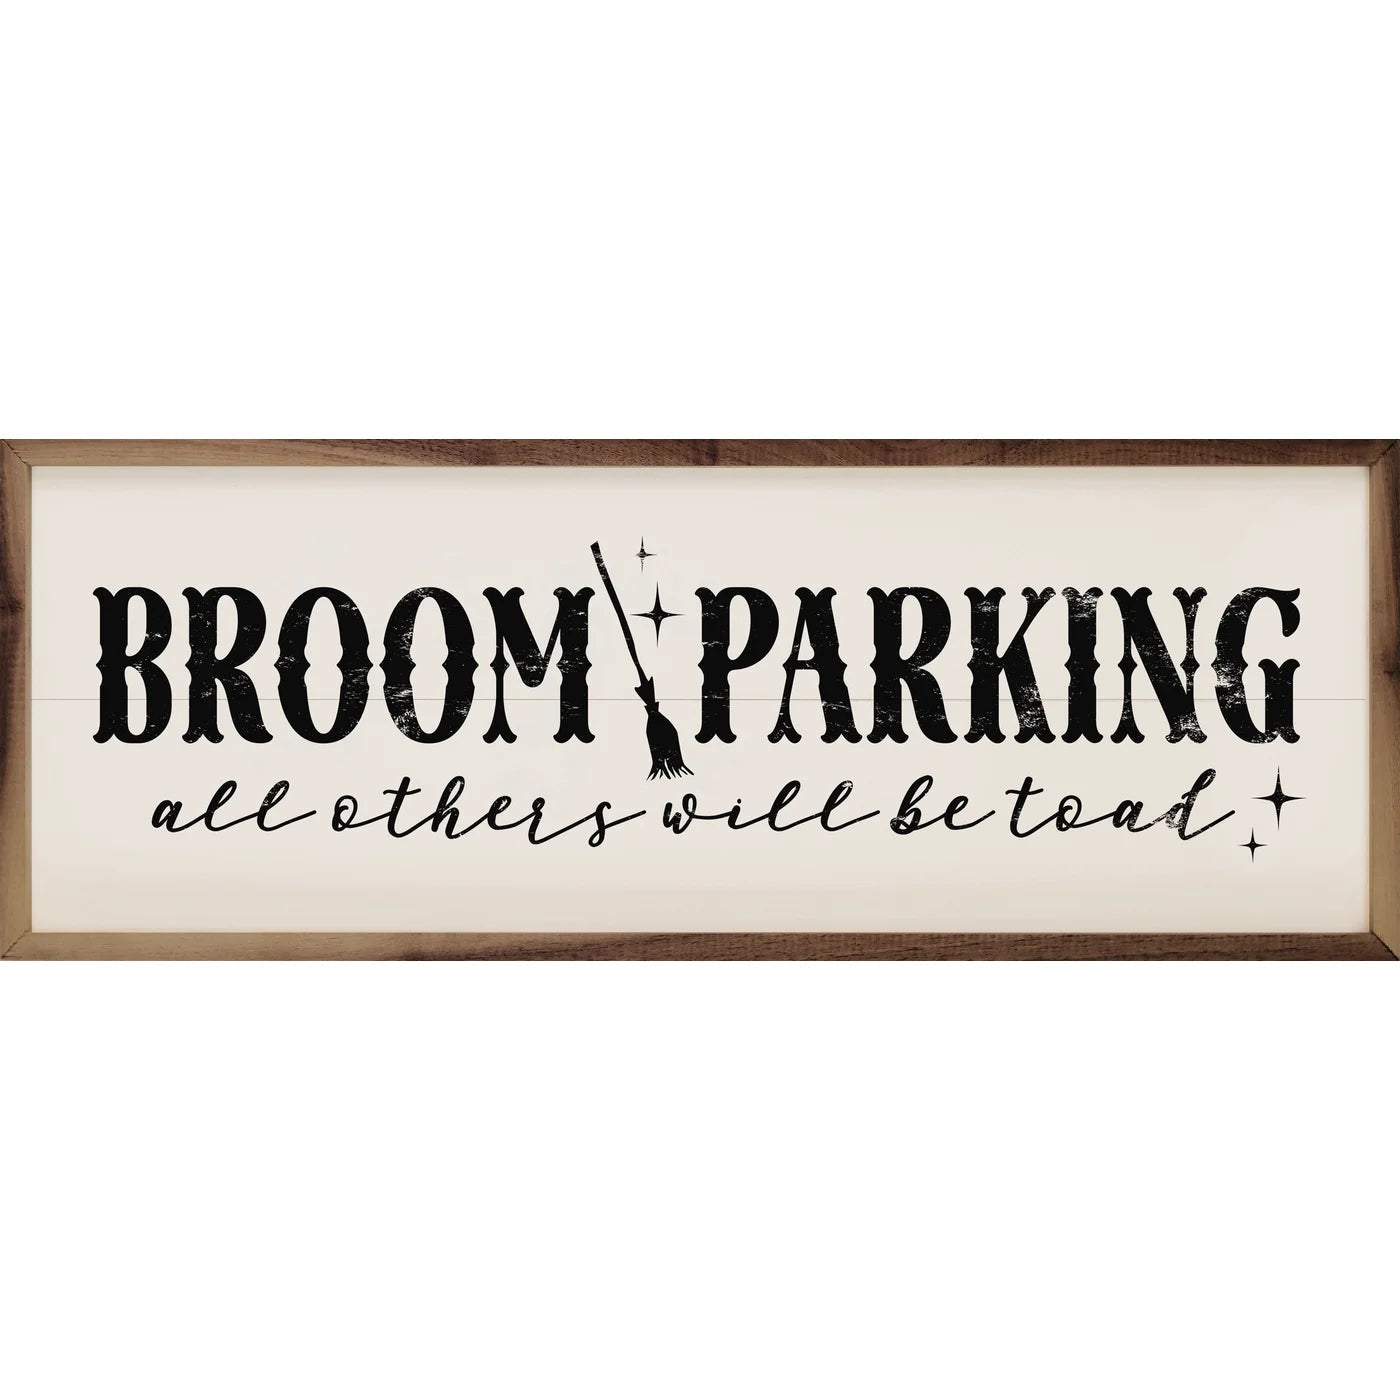 Broom Parking All Others Will Be Toad Wood Framed Print